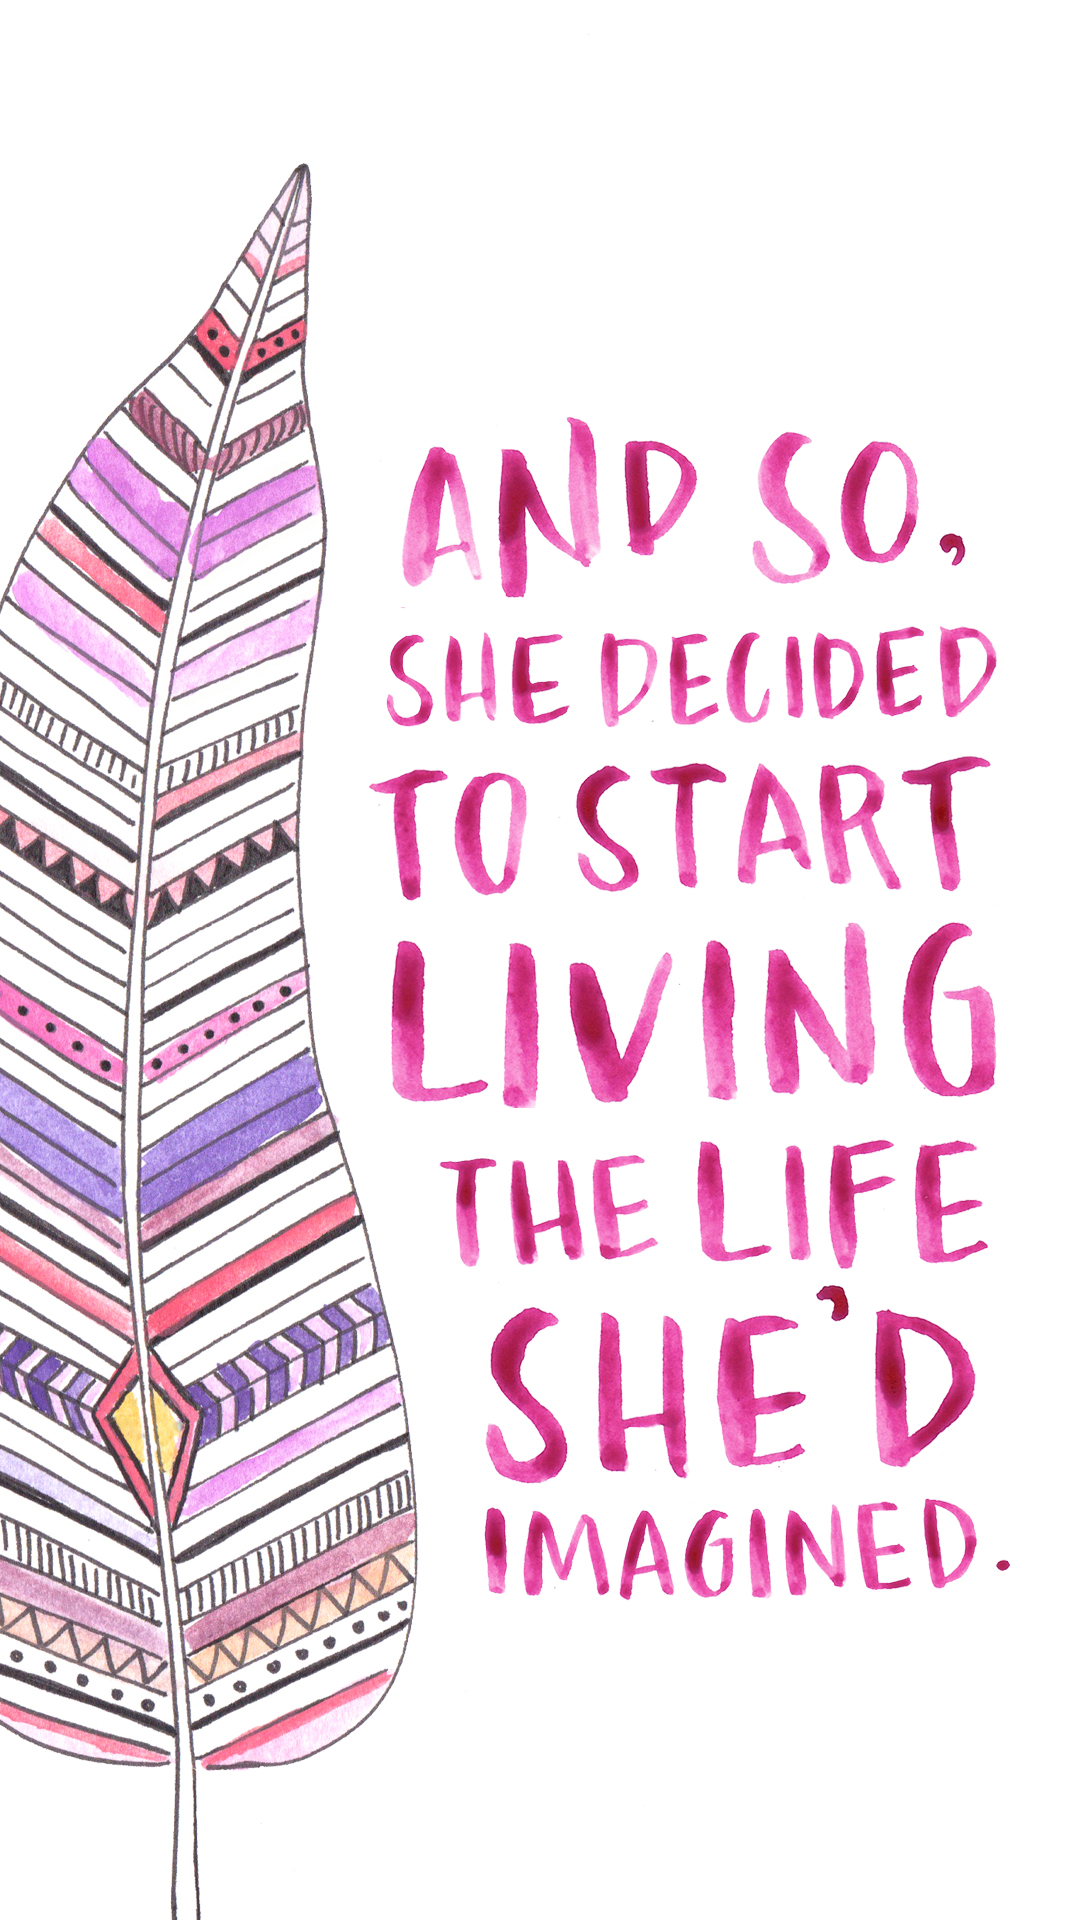 So She Started Living The Life She Imagined - HD Wallpaper 